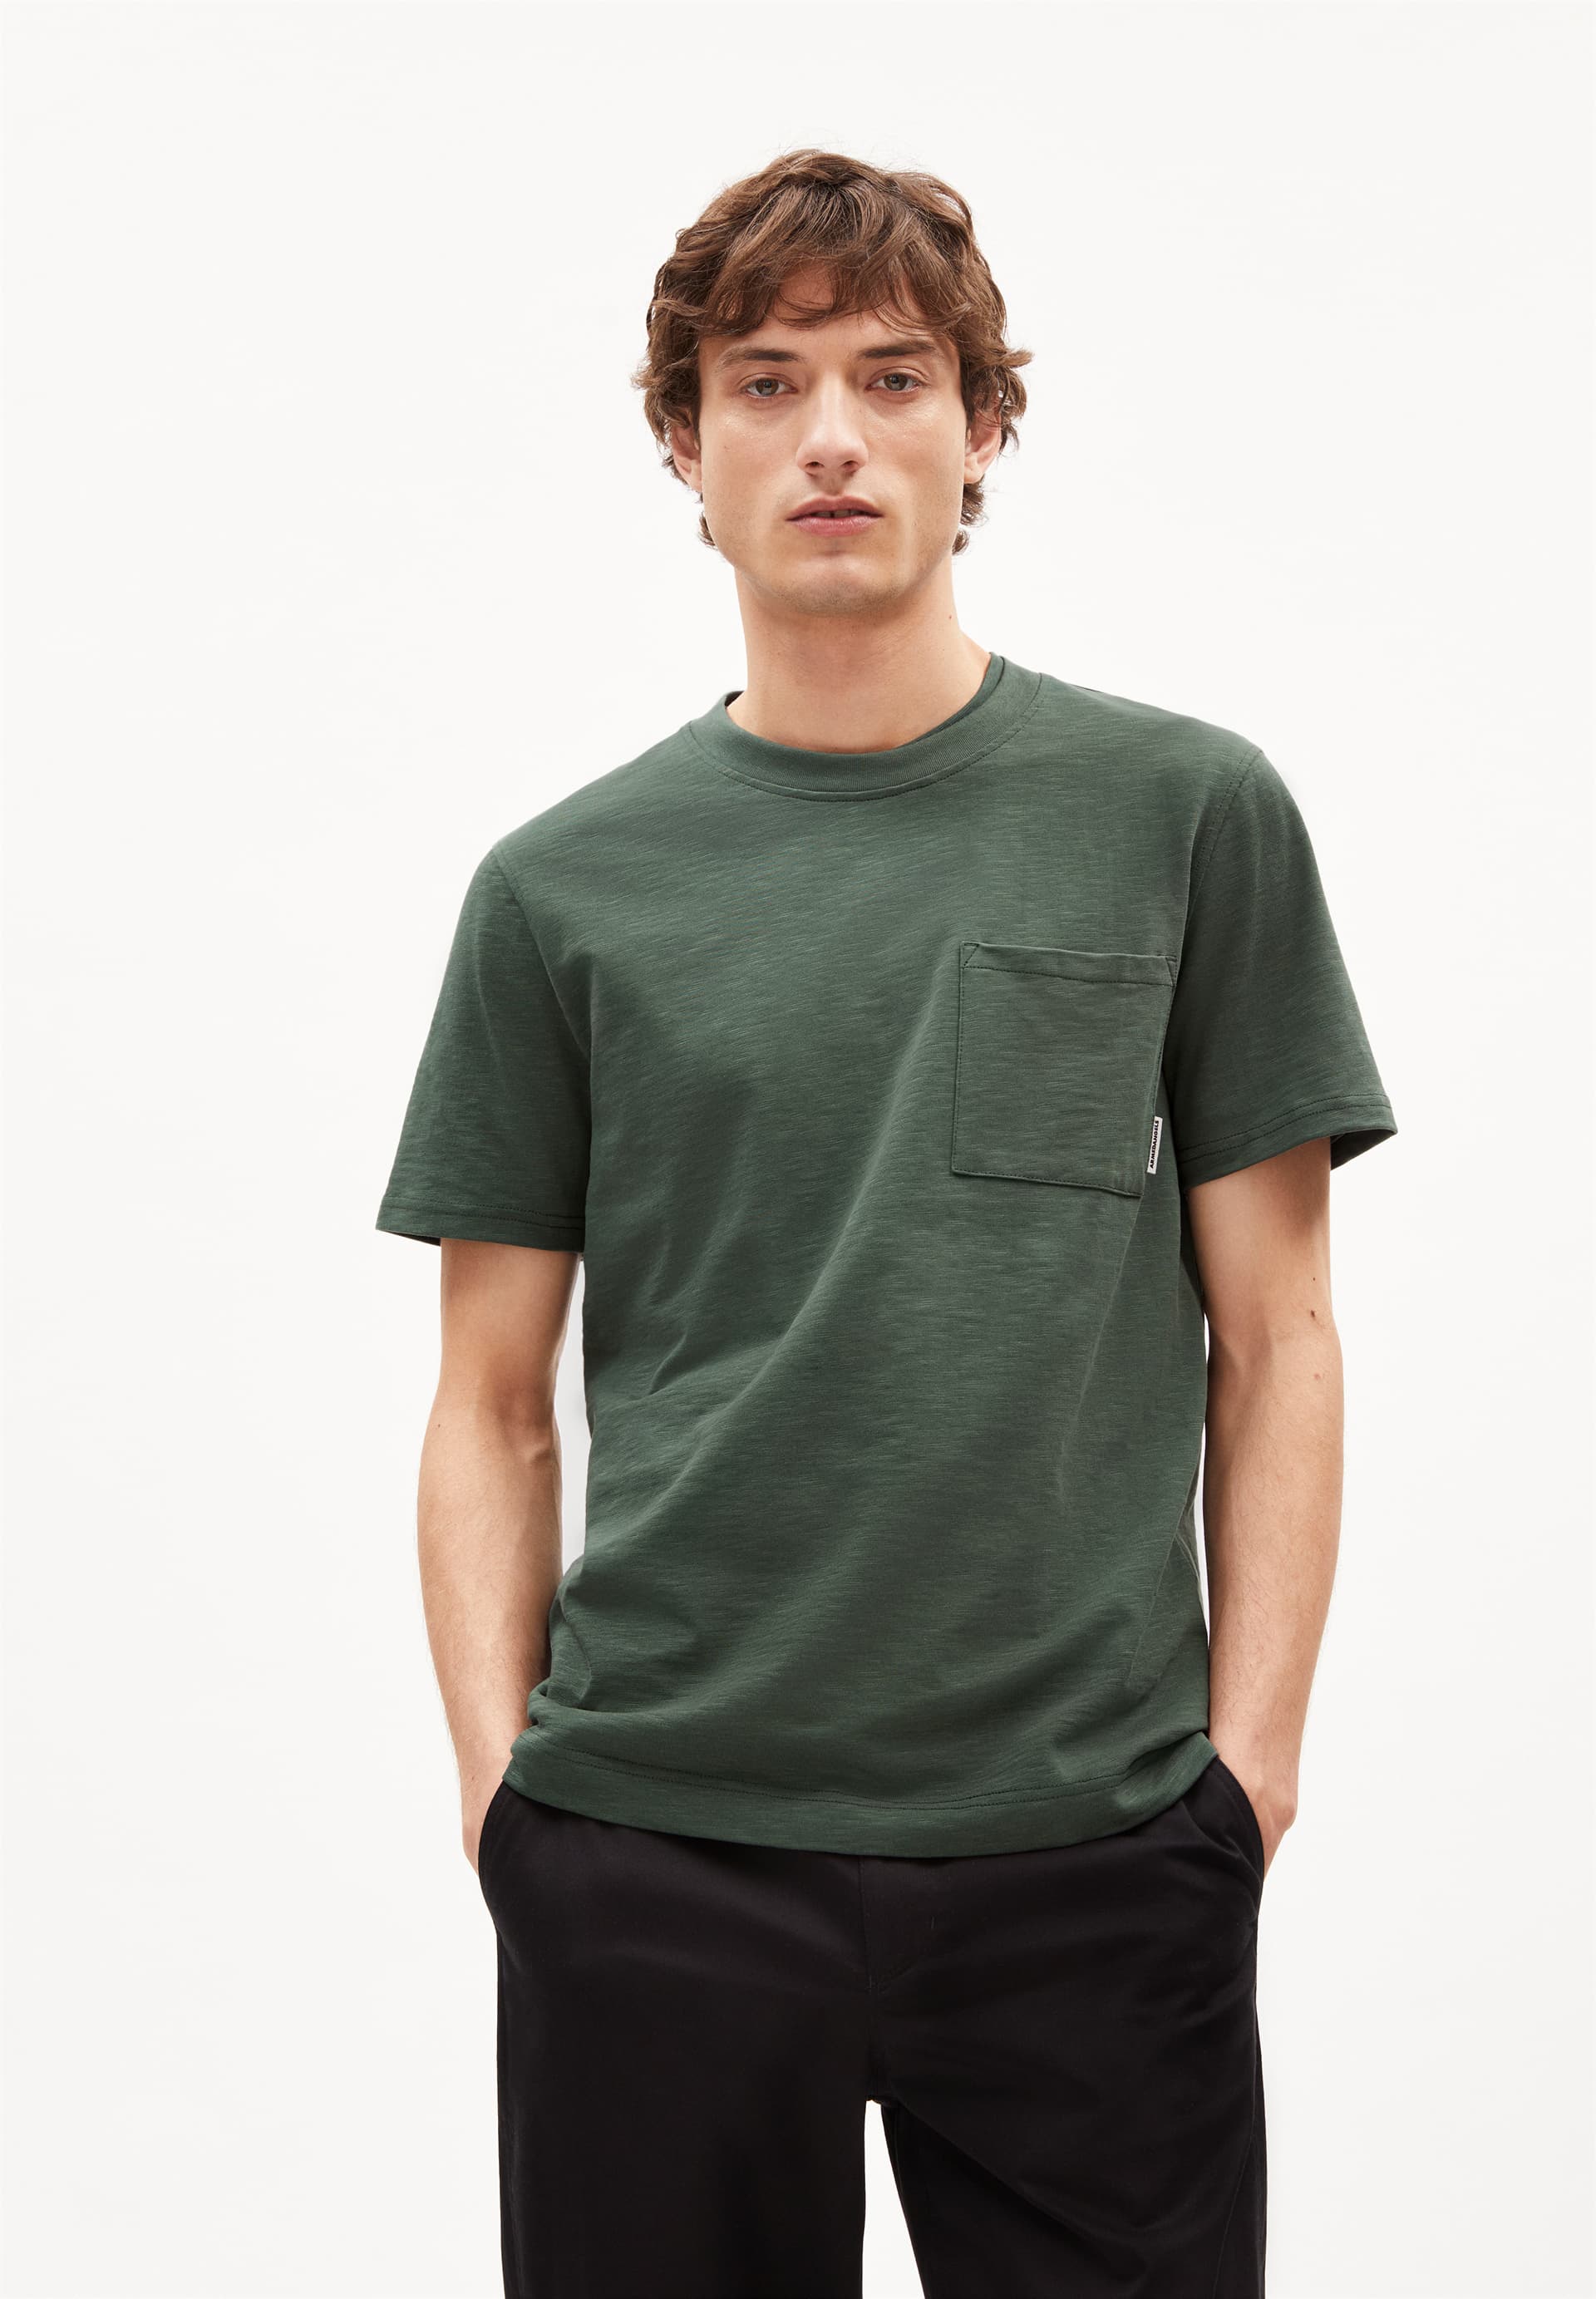 BAZAAO FLAMÉ T-Shirt Relaxed Fit made of Organic Cotton